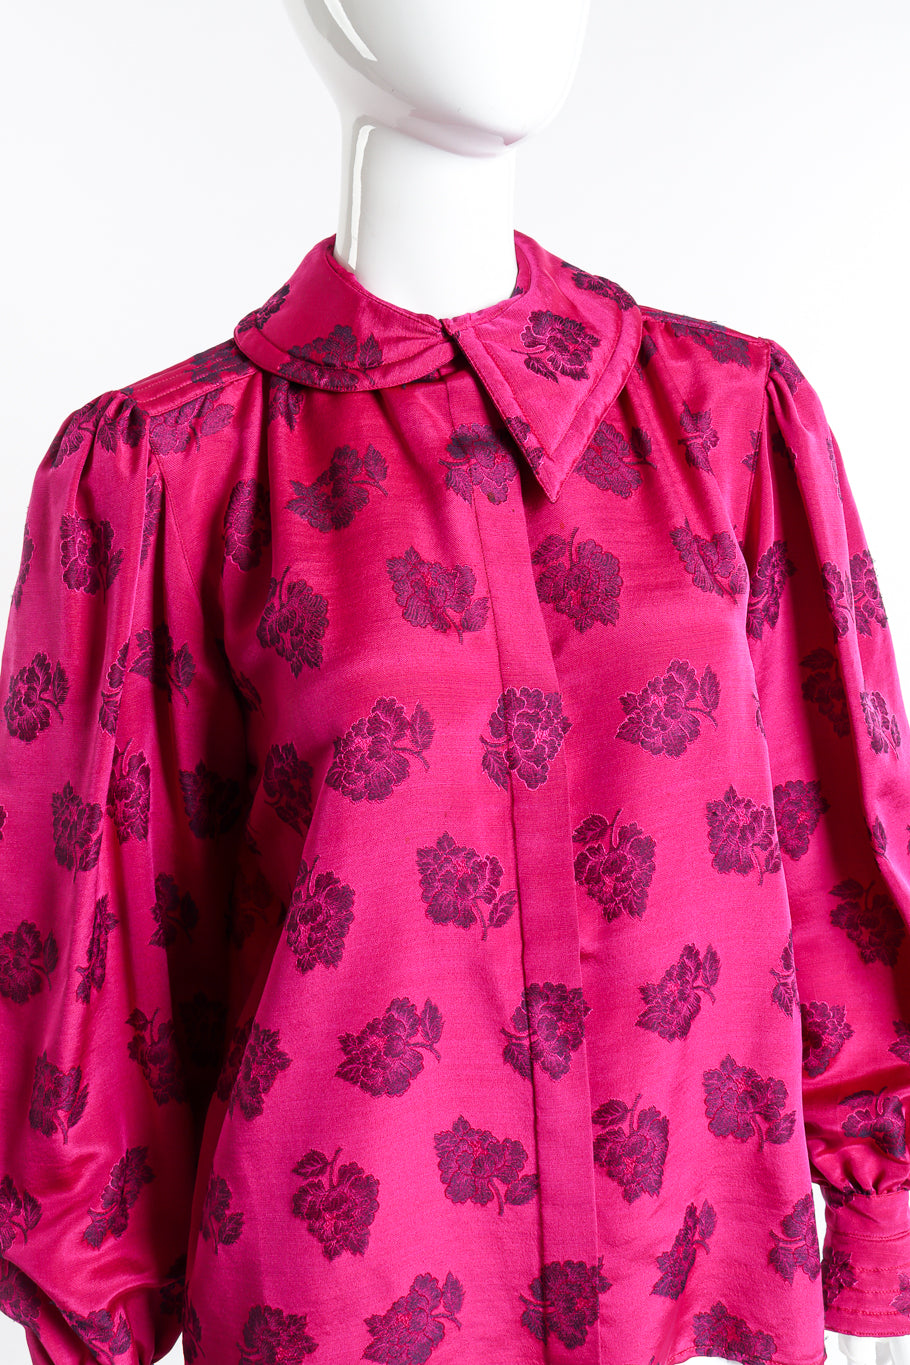 Floral Quilted Dagger Collar Blouse by Escada close up front view on mannequin @Recess LA